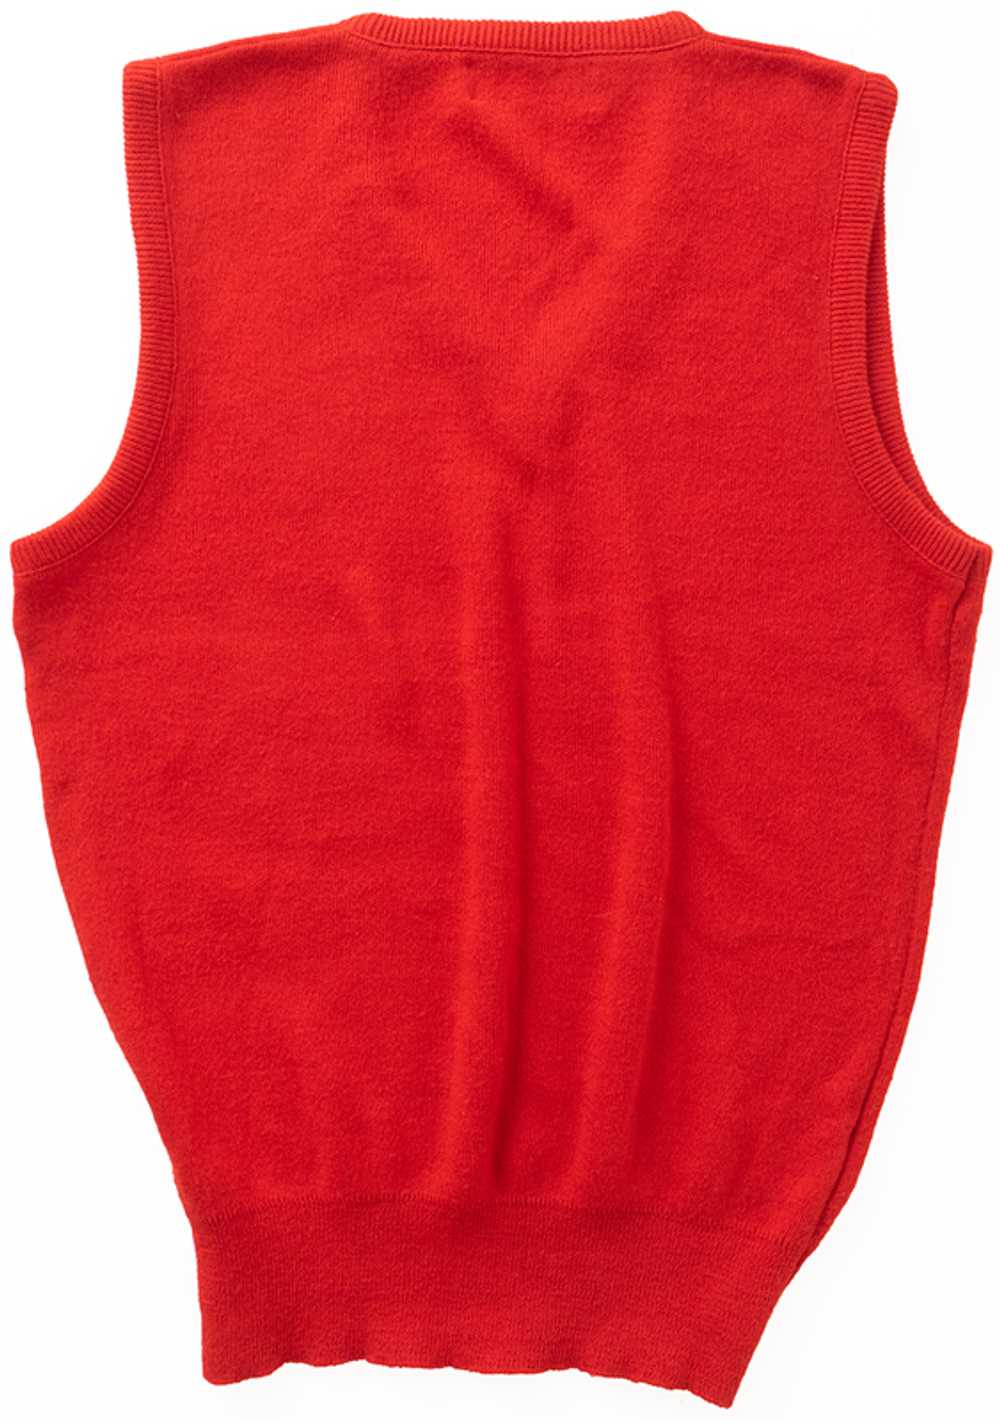 1970s Red Sweater Vest - image 3